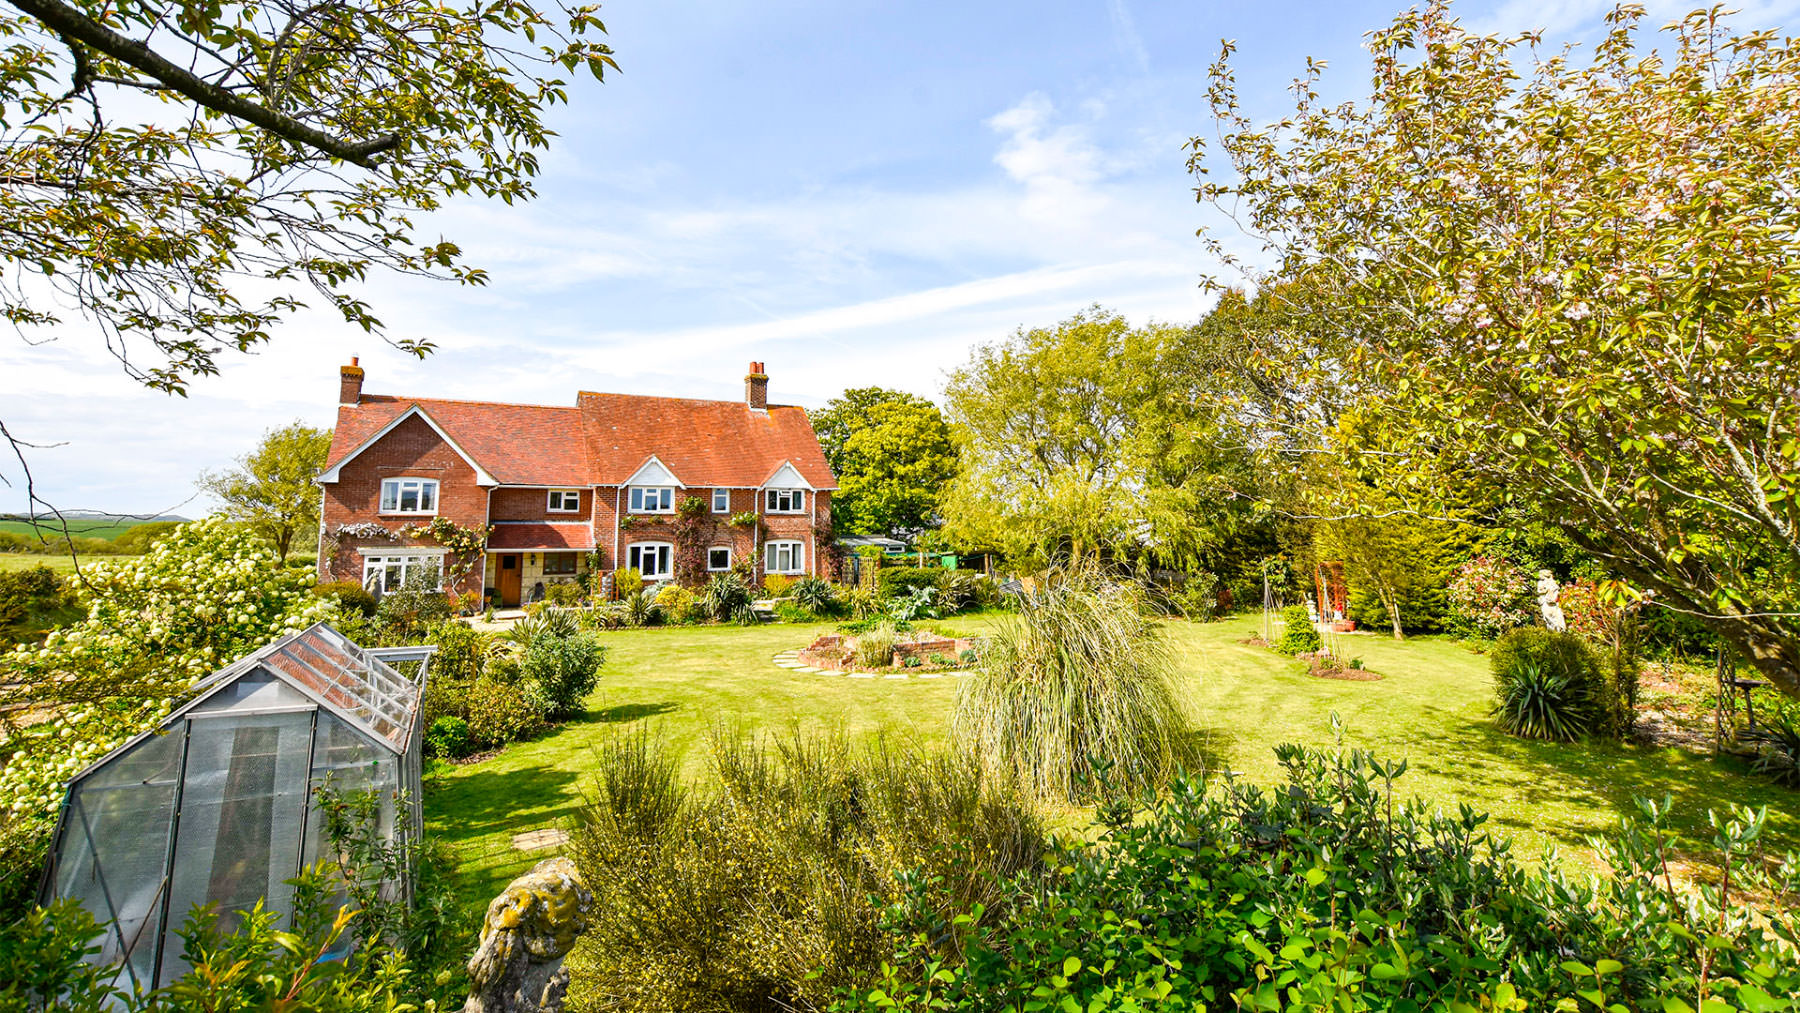 Ford Farm House Bed and Breakfast Isle of Wight